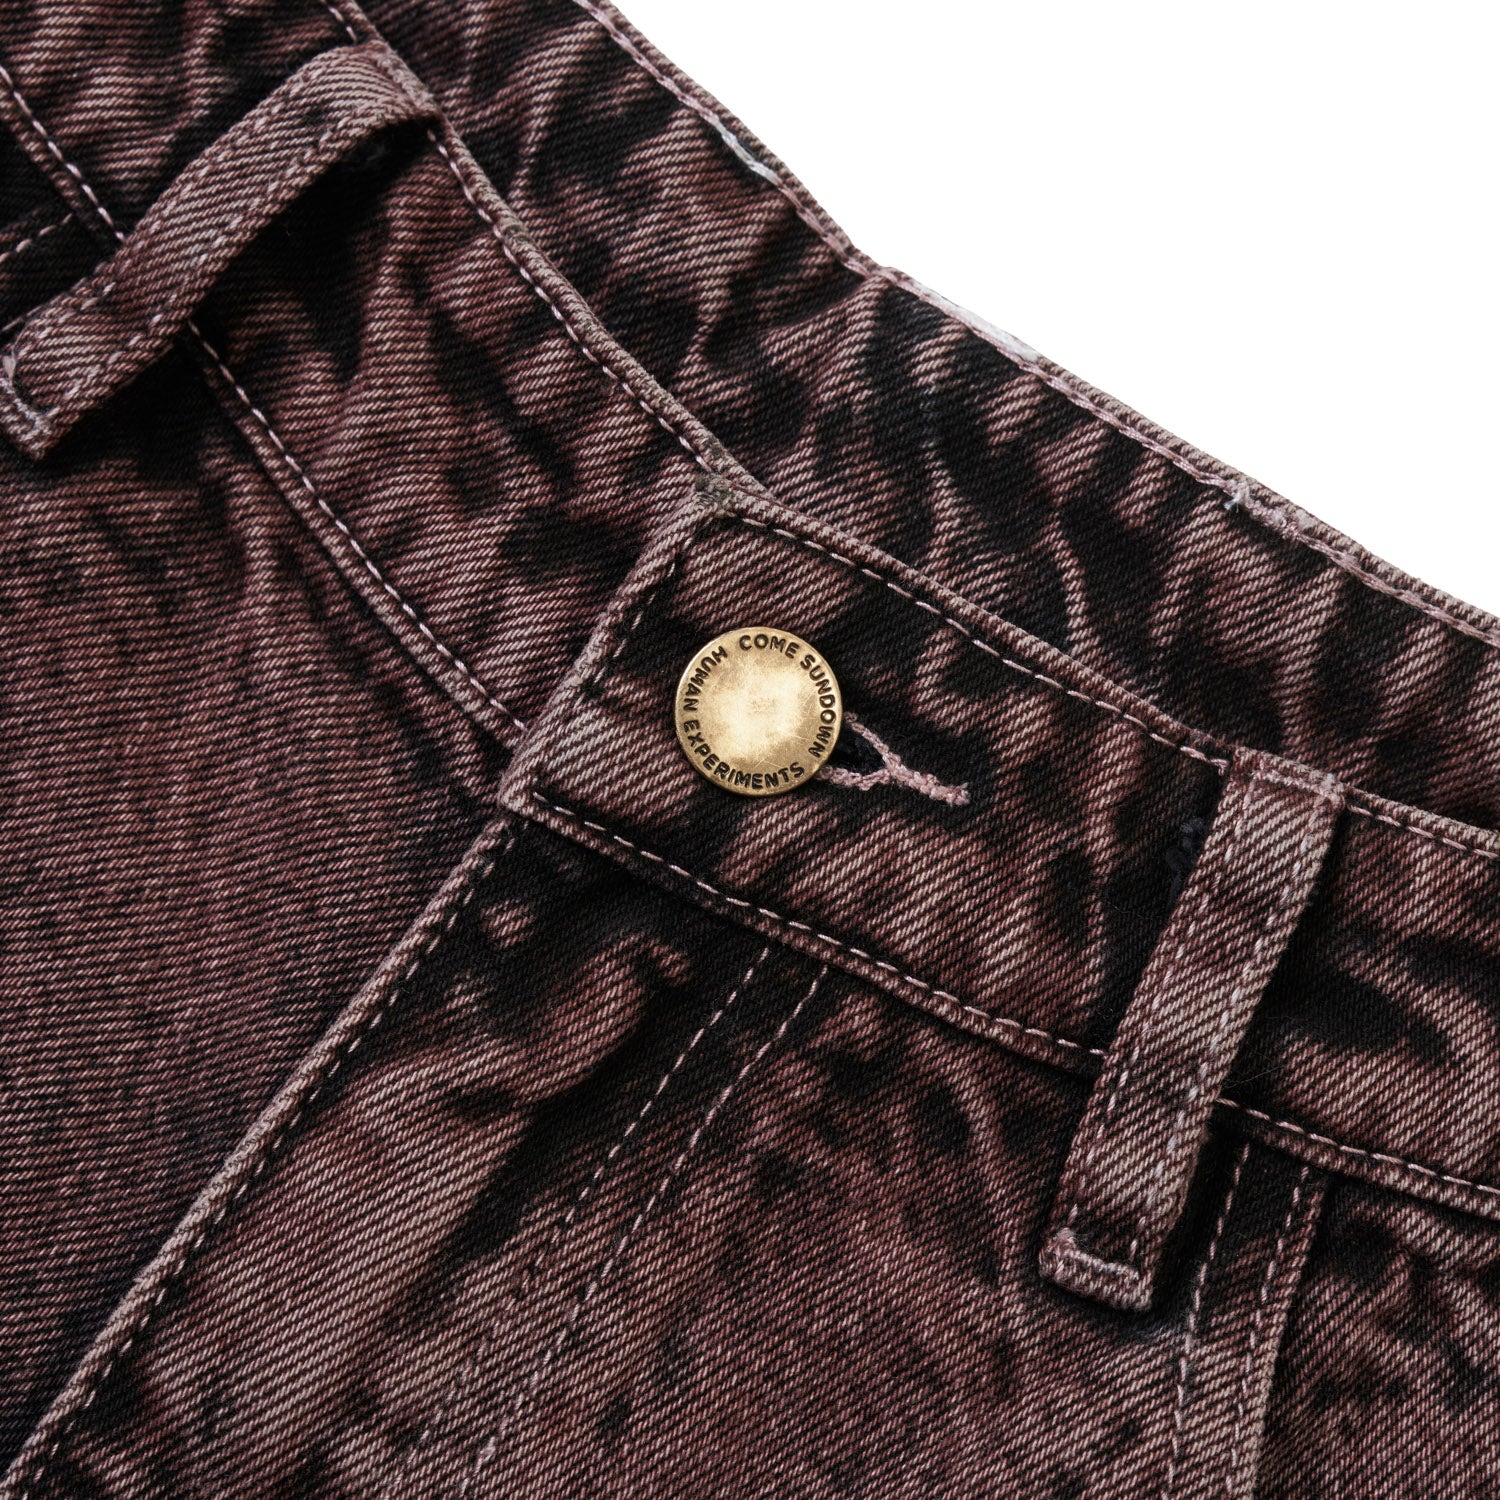 Helix Jeans, Washed Plum